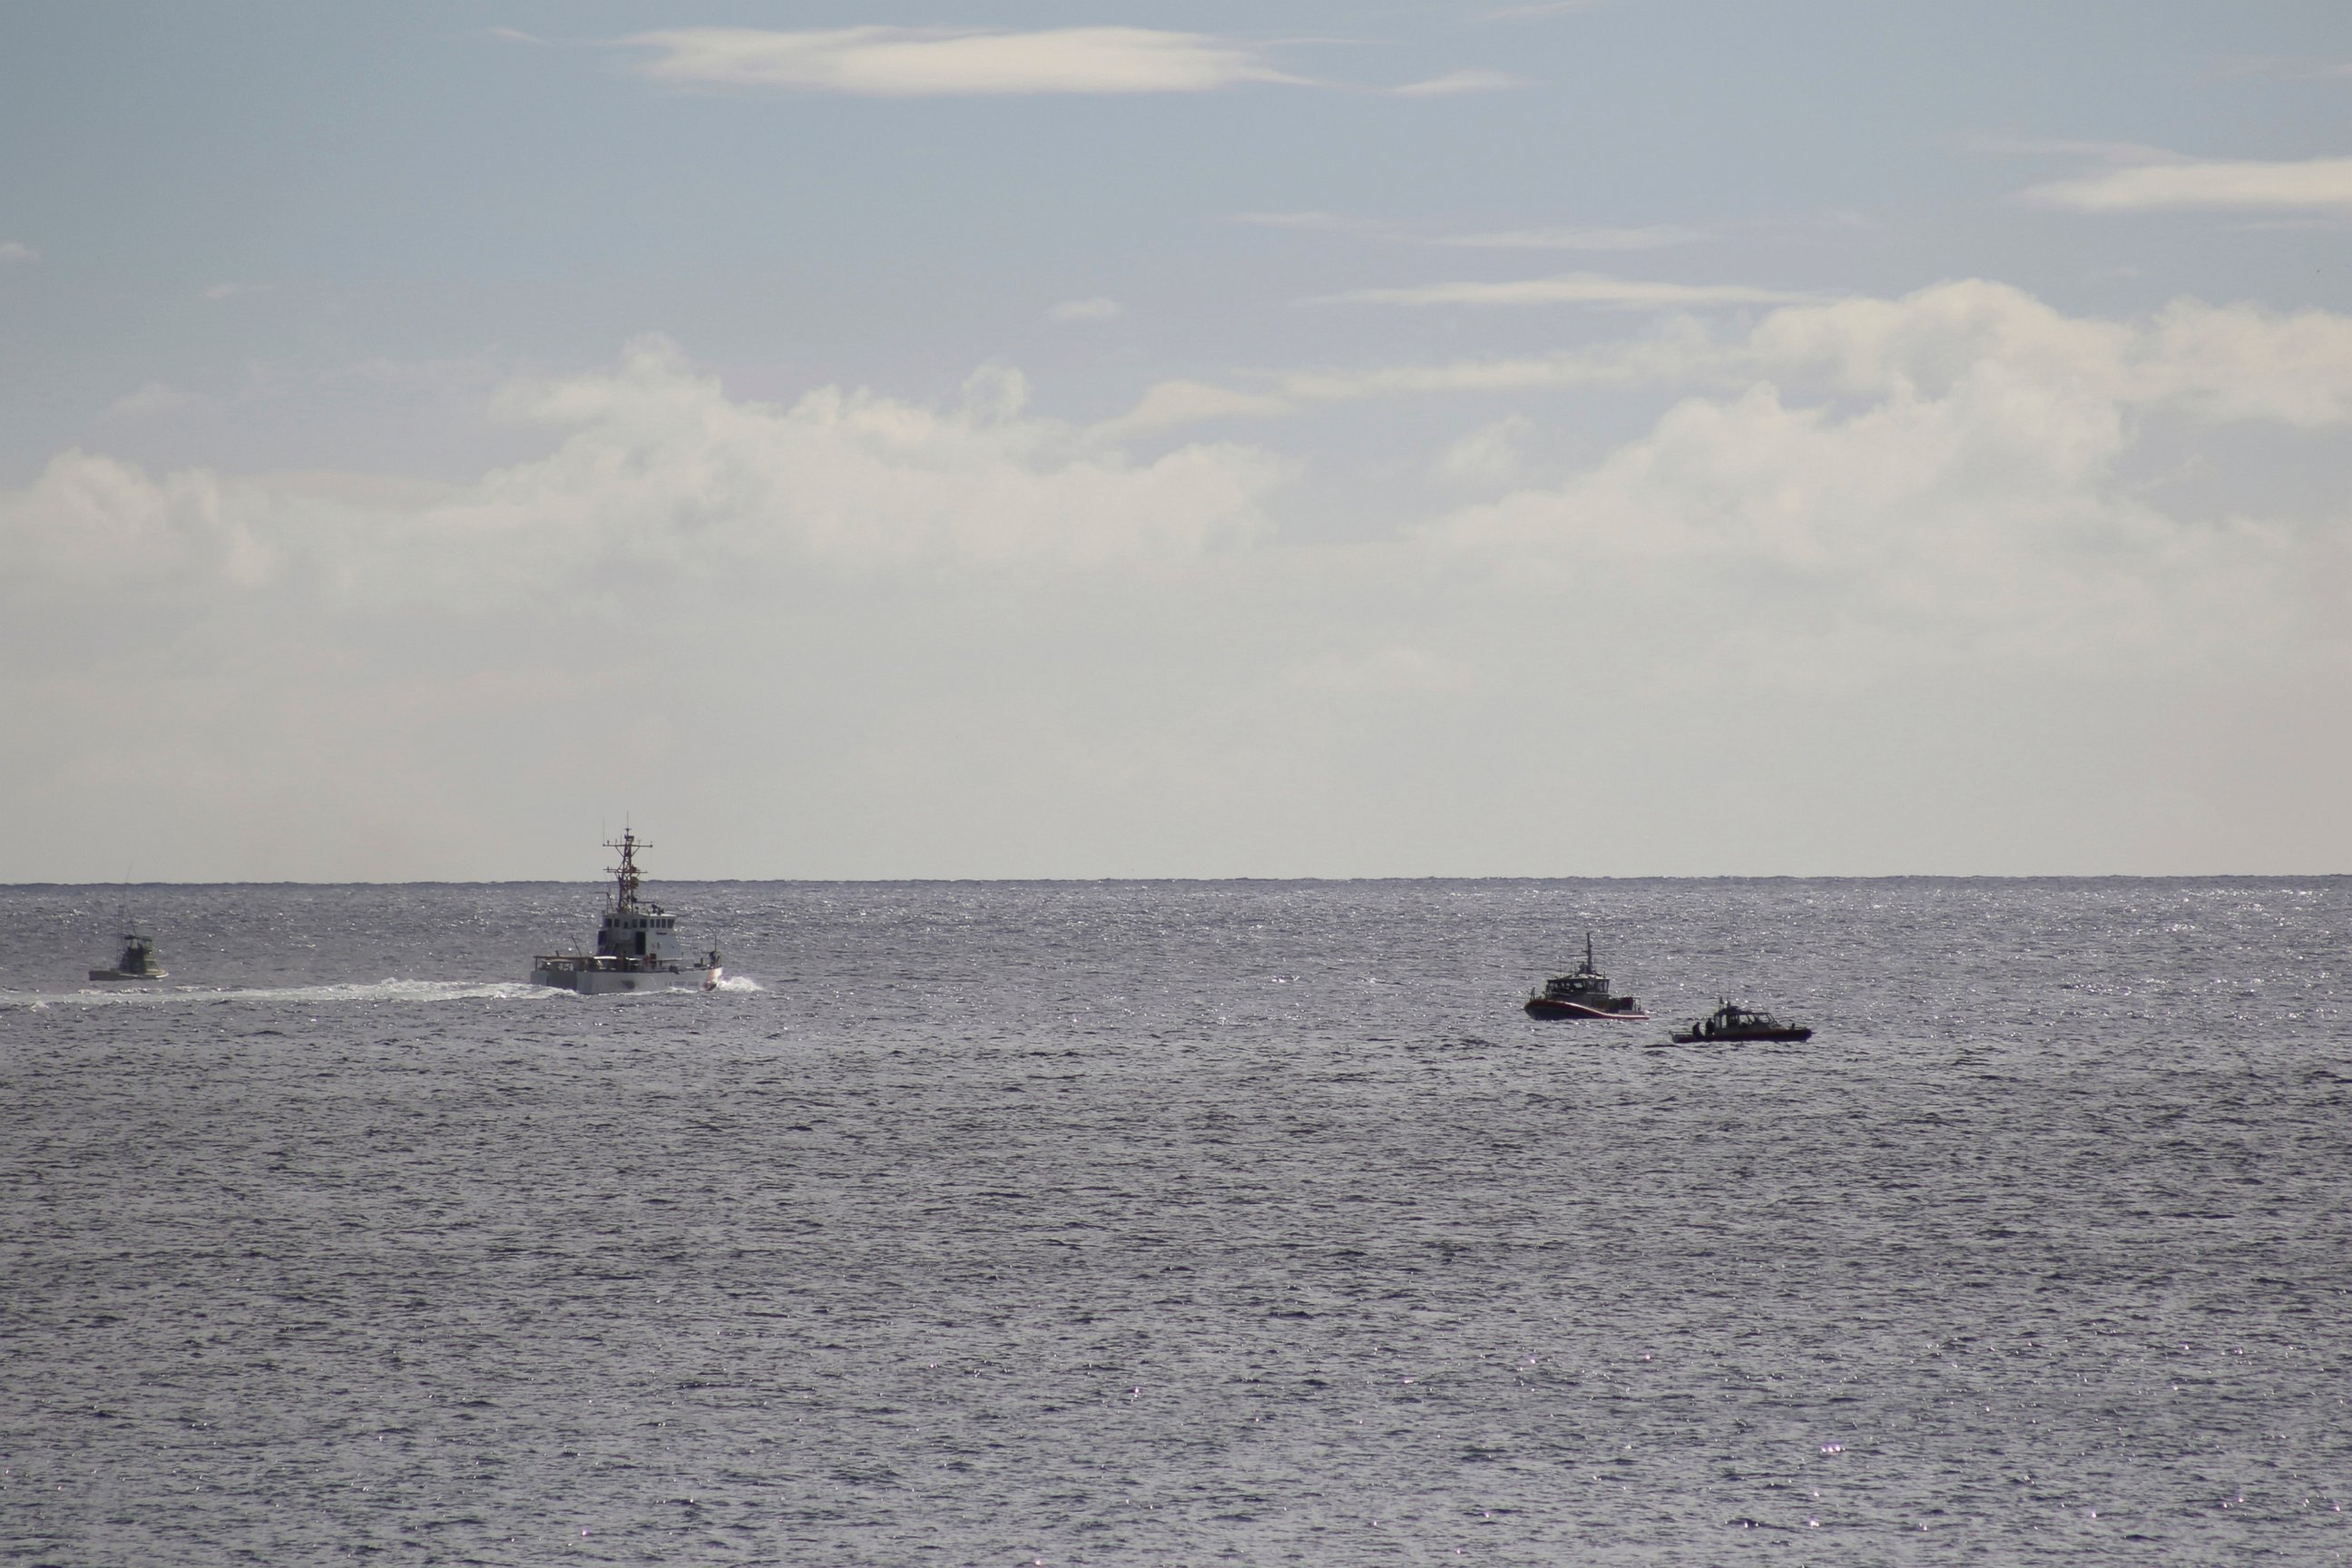 PHOTO: A U.S. Coast Guard vessel and other rescue boats respond to a plane crash off Honolulu, Wednesday, Dec. 12, 2018. Federal Aviation Administration spokesman Ian Gregor said a Hawker Hunter jet went down in the ocean around 2:25 p.m.